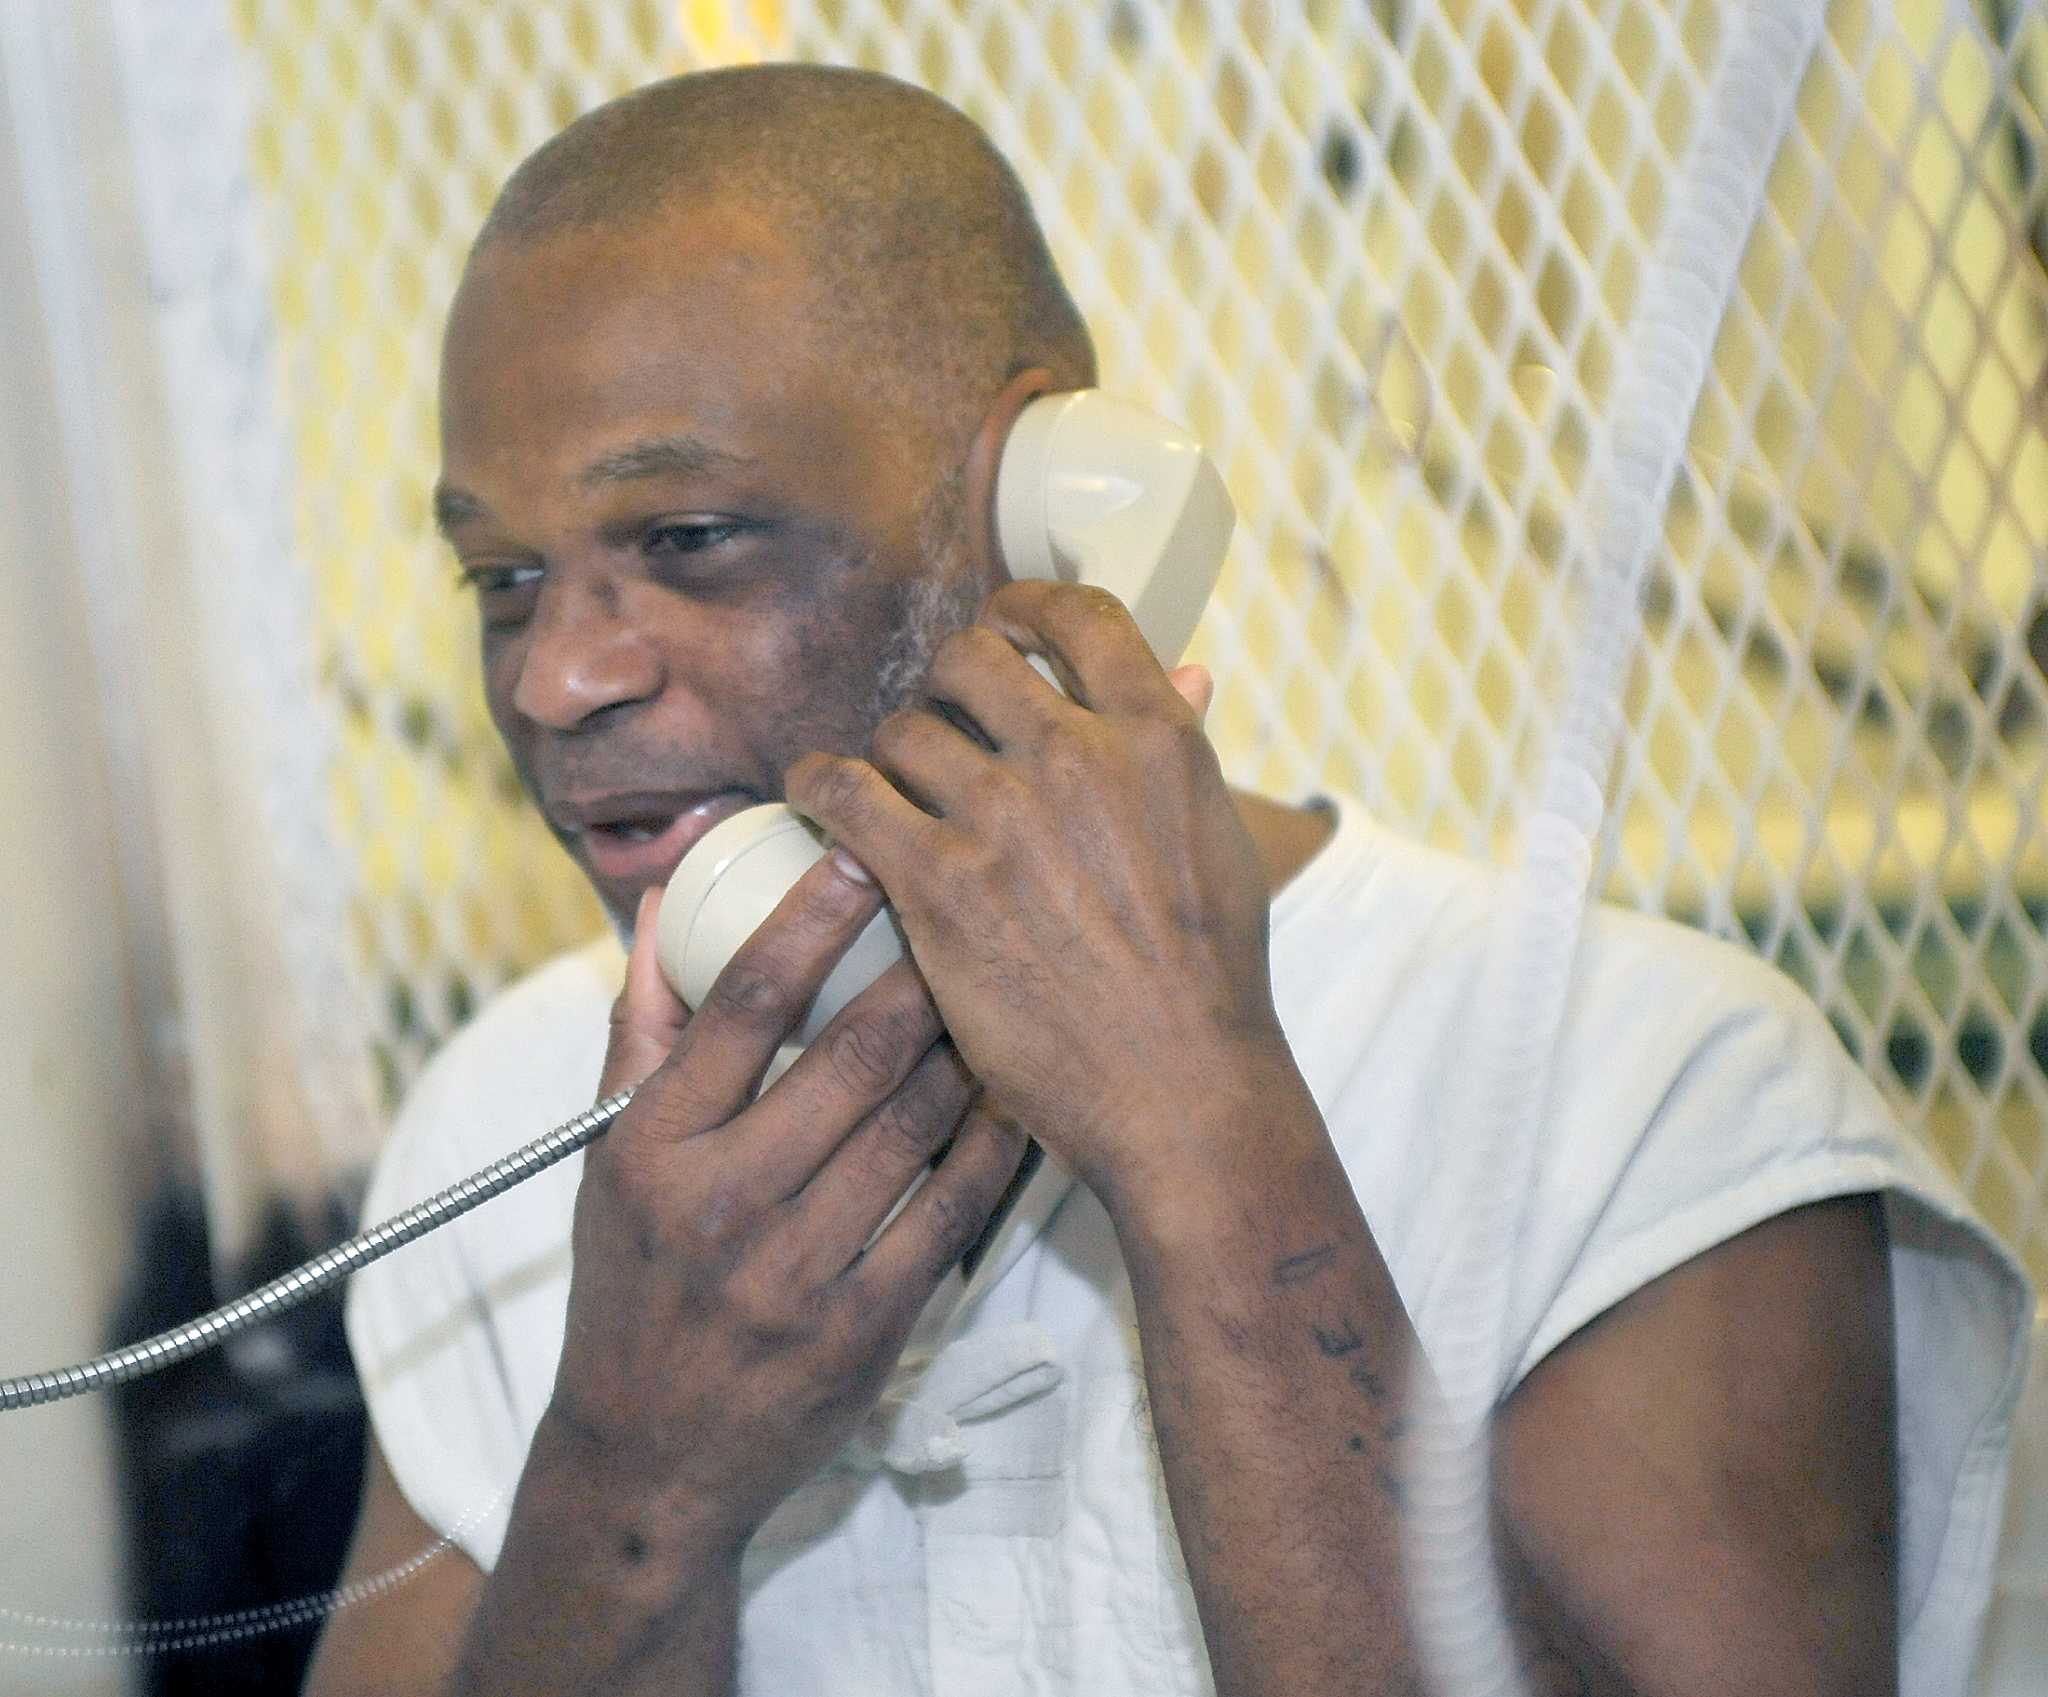 Texas executes Beaumont man despite his claims of low IQ